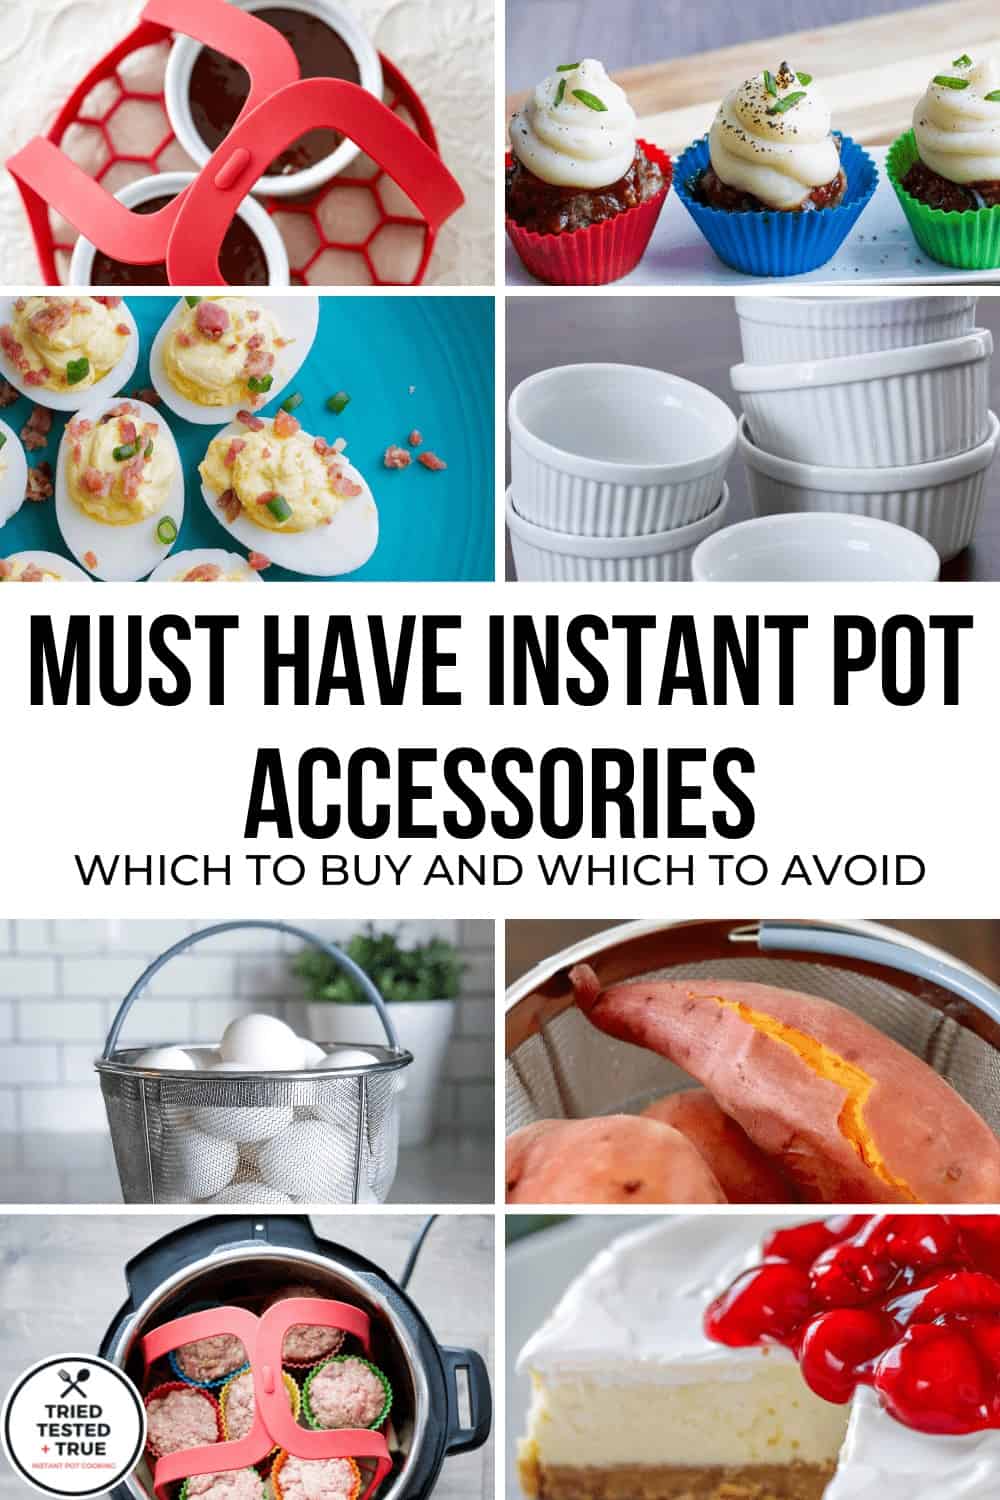 https://triedtestedandtrue.com/wp-content/uploads/2021/07/Best-Instant-Pot-Accessories-to-Buy-and-Avoid.jpg